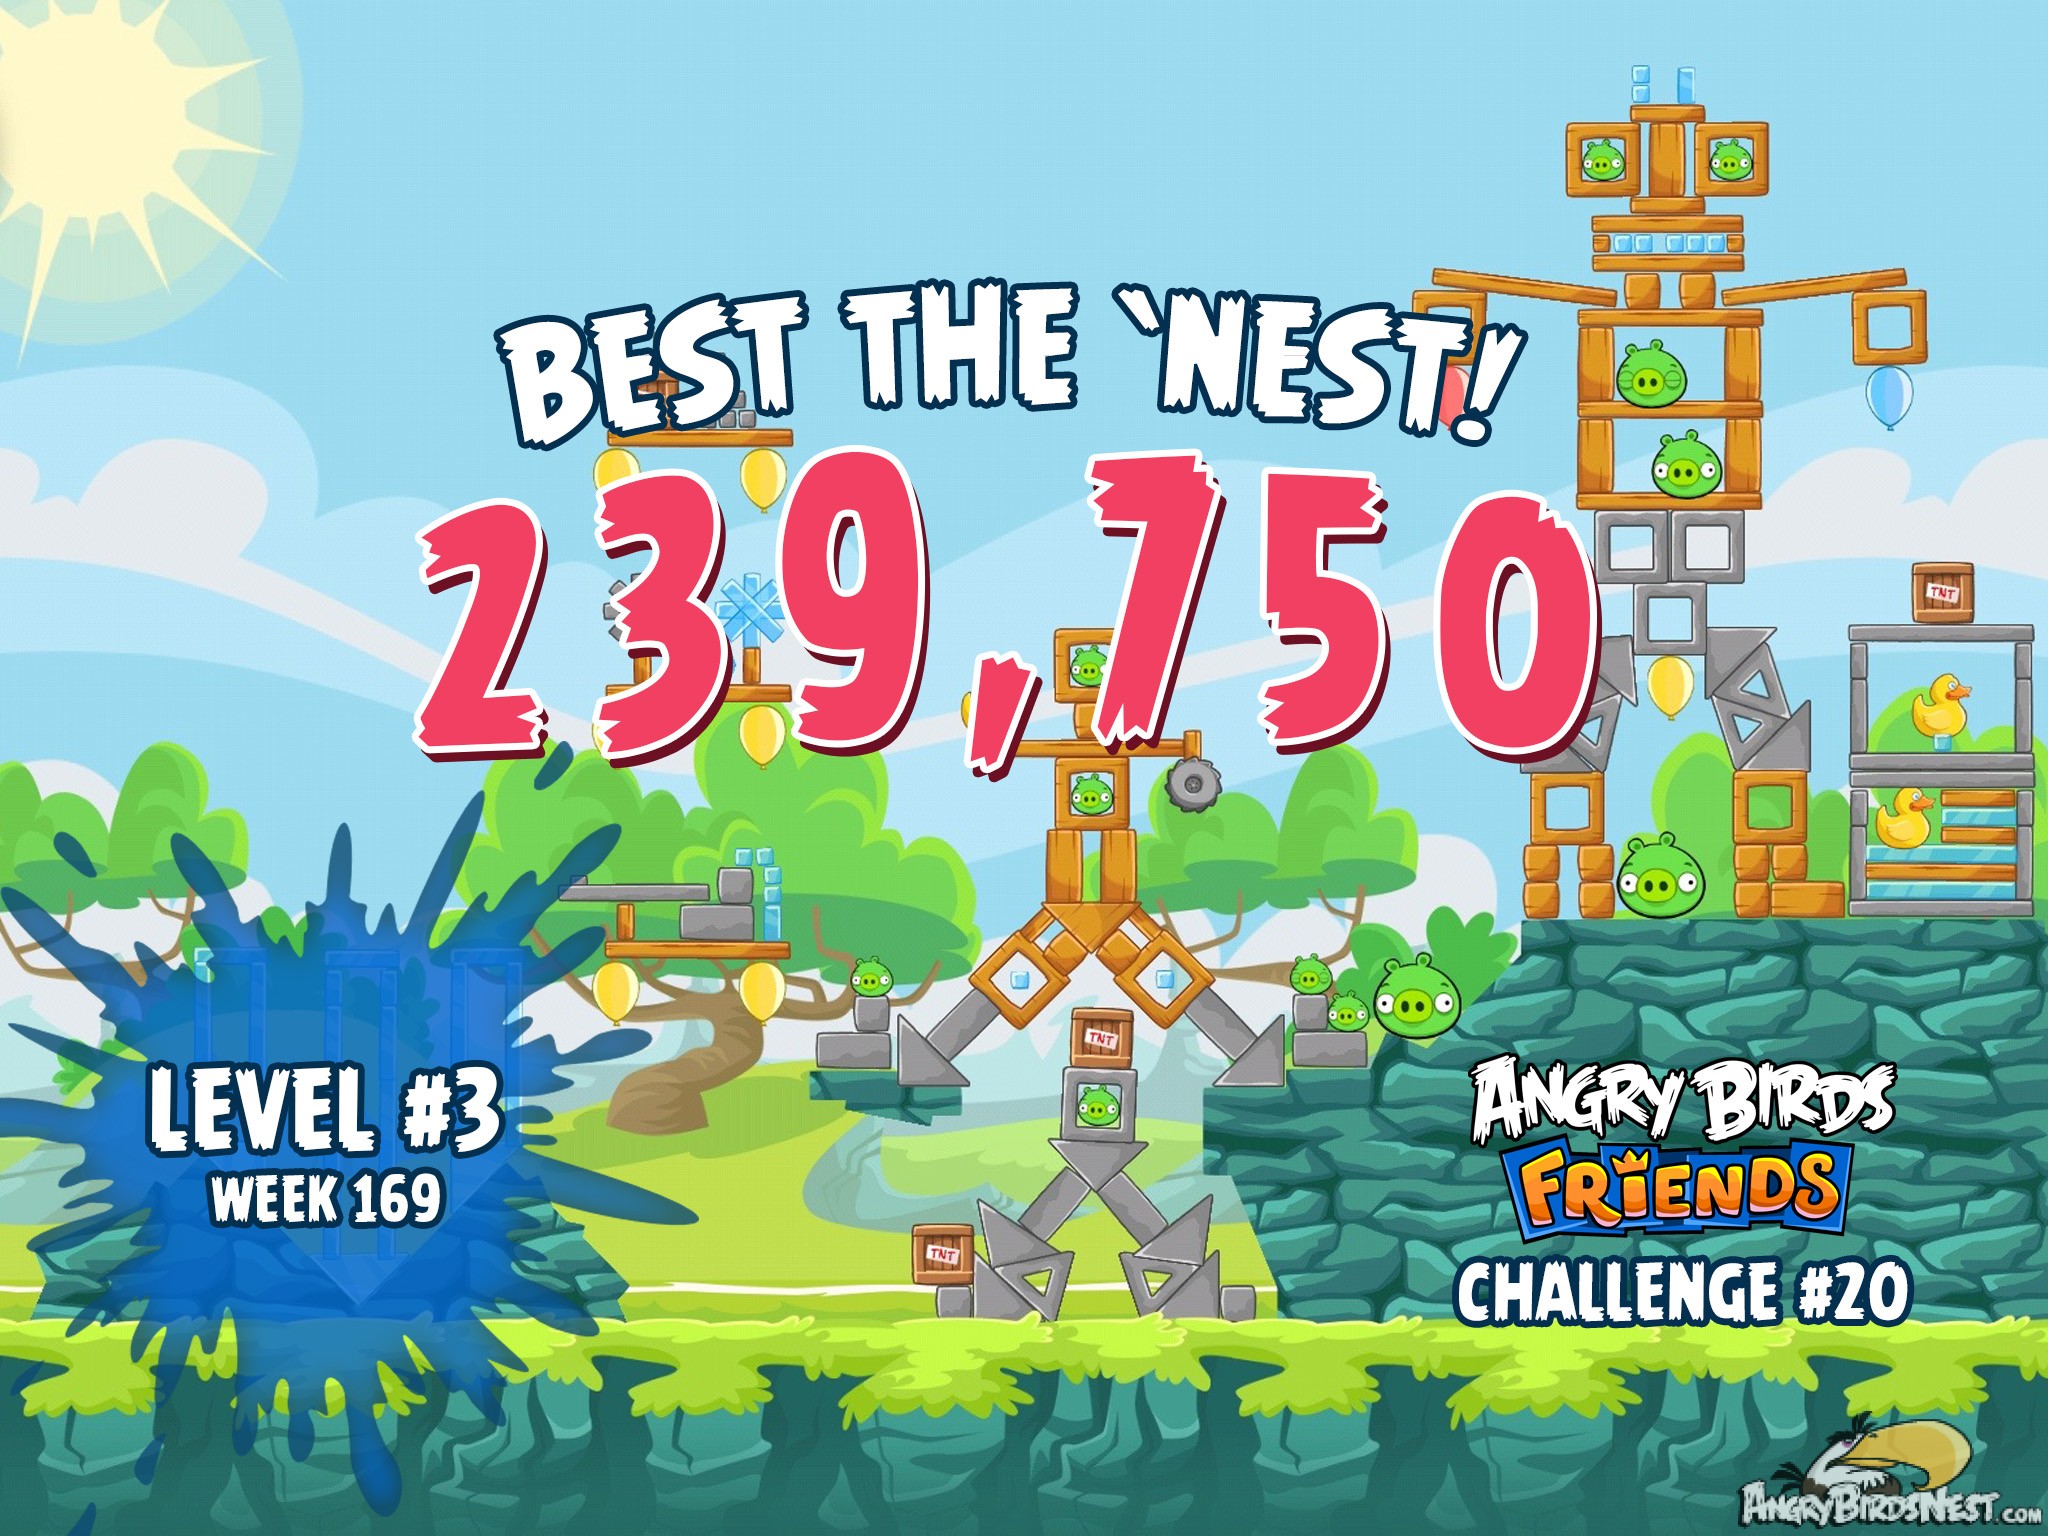 Angry Birds Friends Best the Nest Challenge Week 20